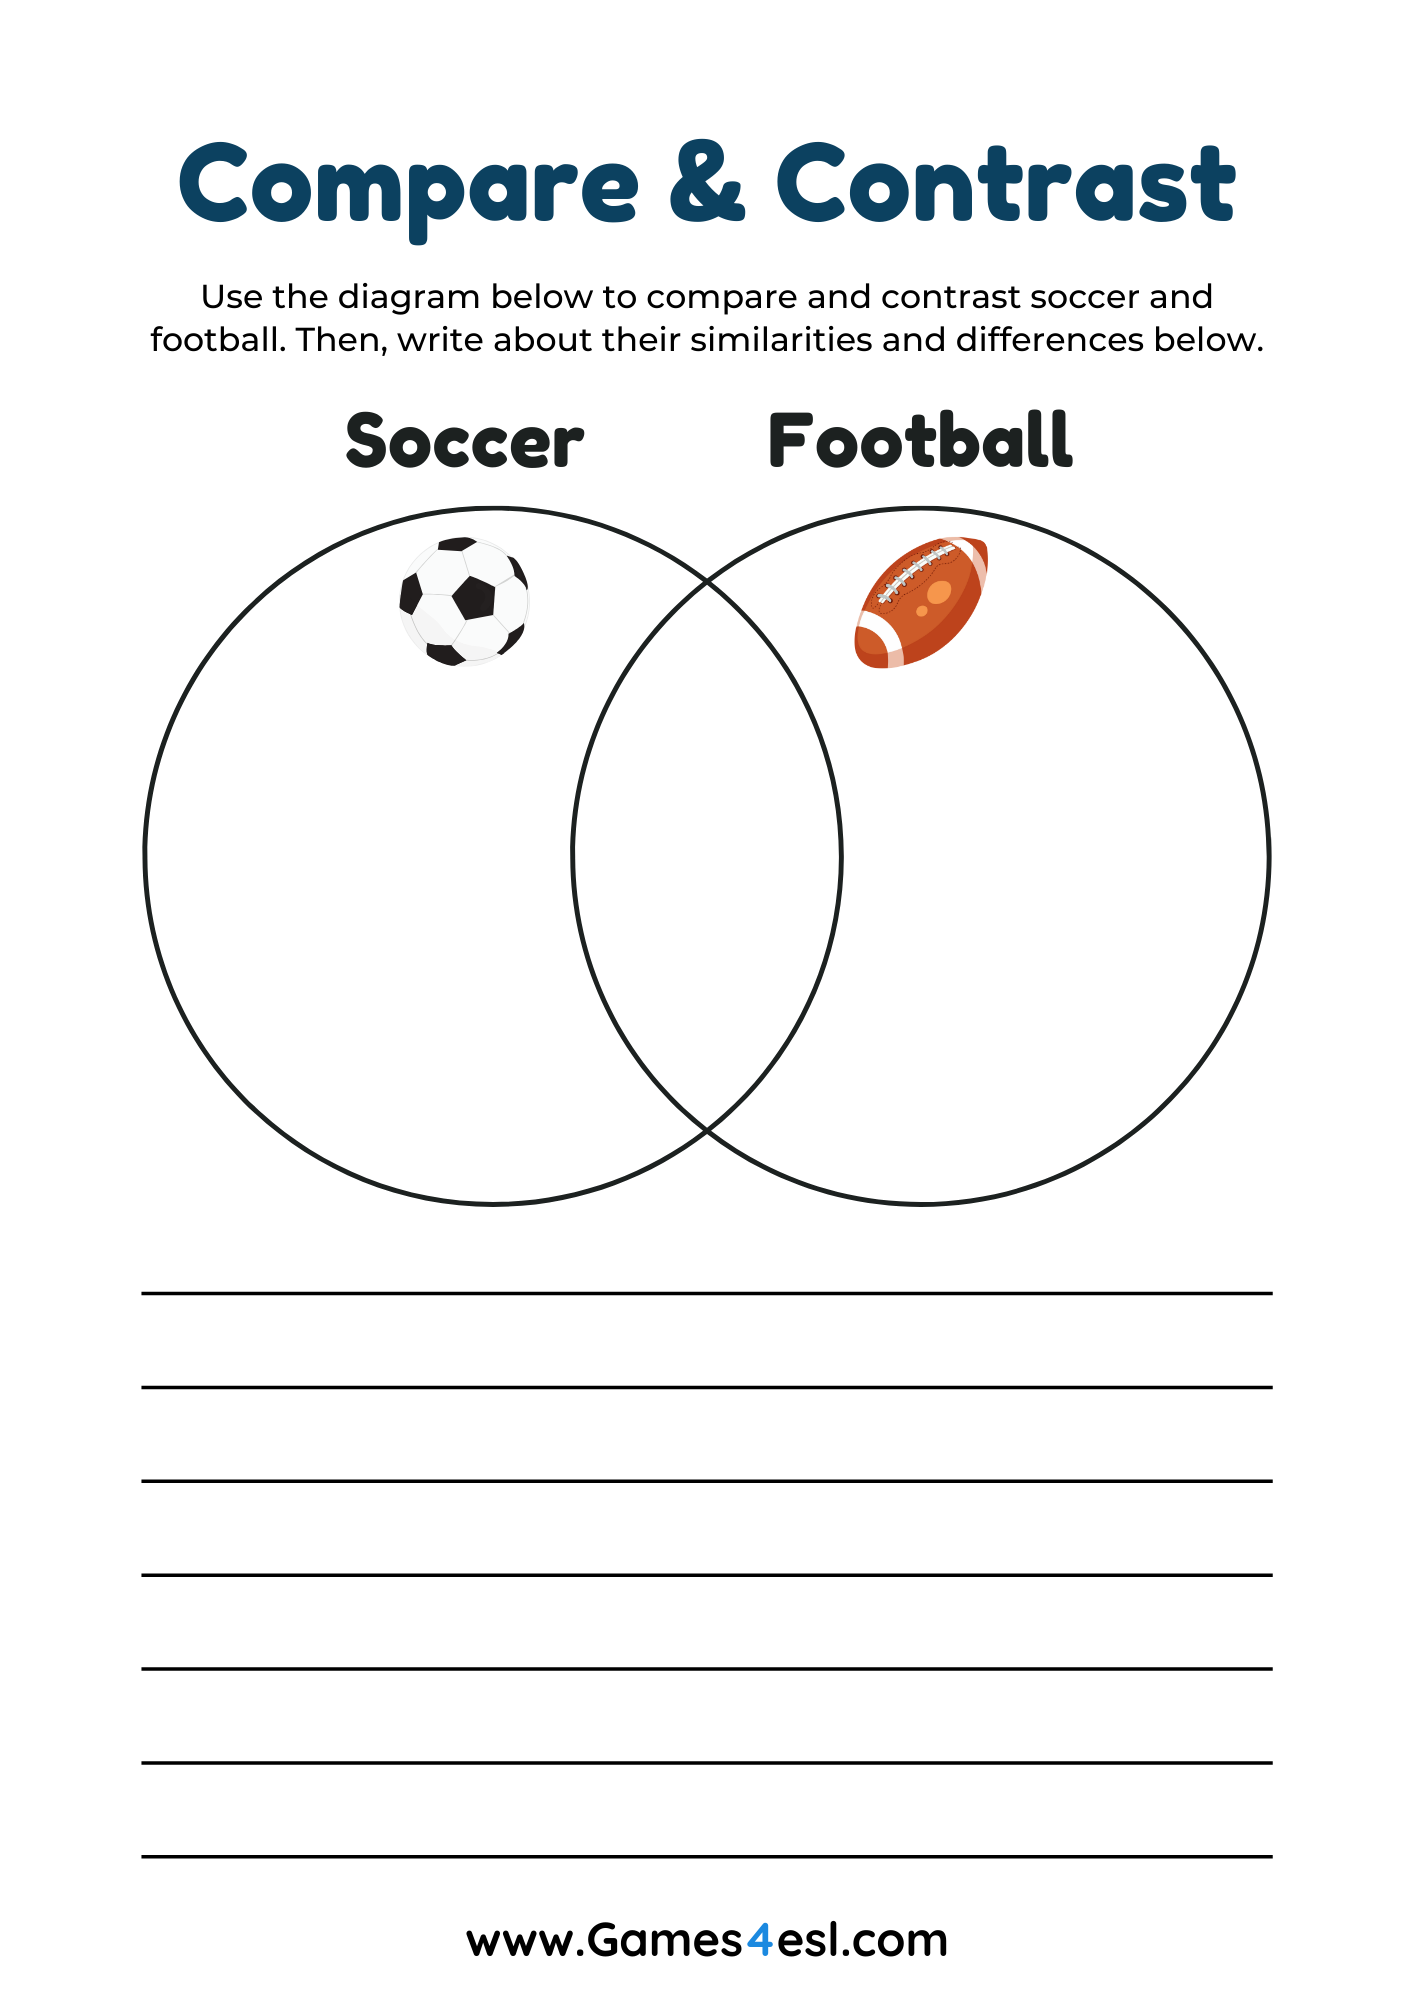 A Compare and Contrast worksheet with a Venn diagram that asks students to compare and contrast soccer and football.